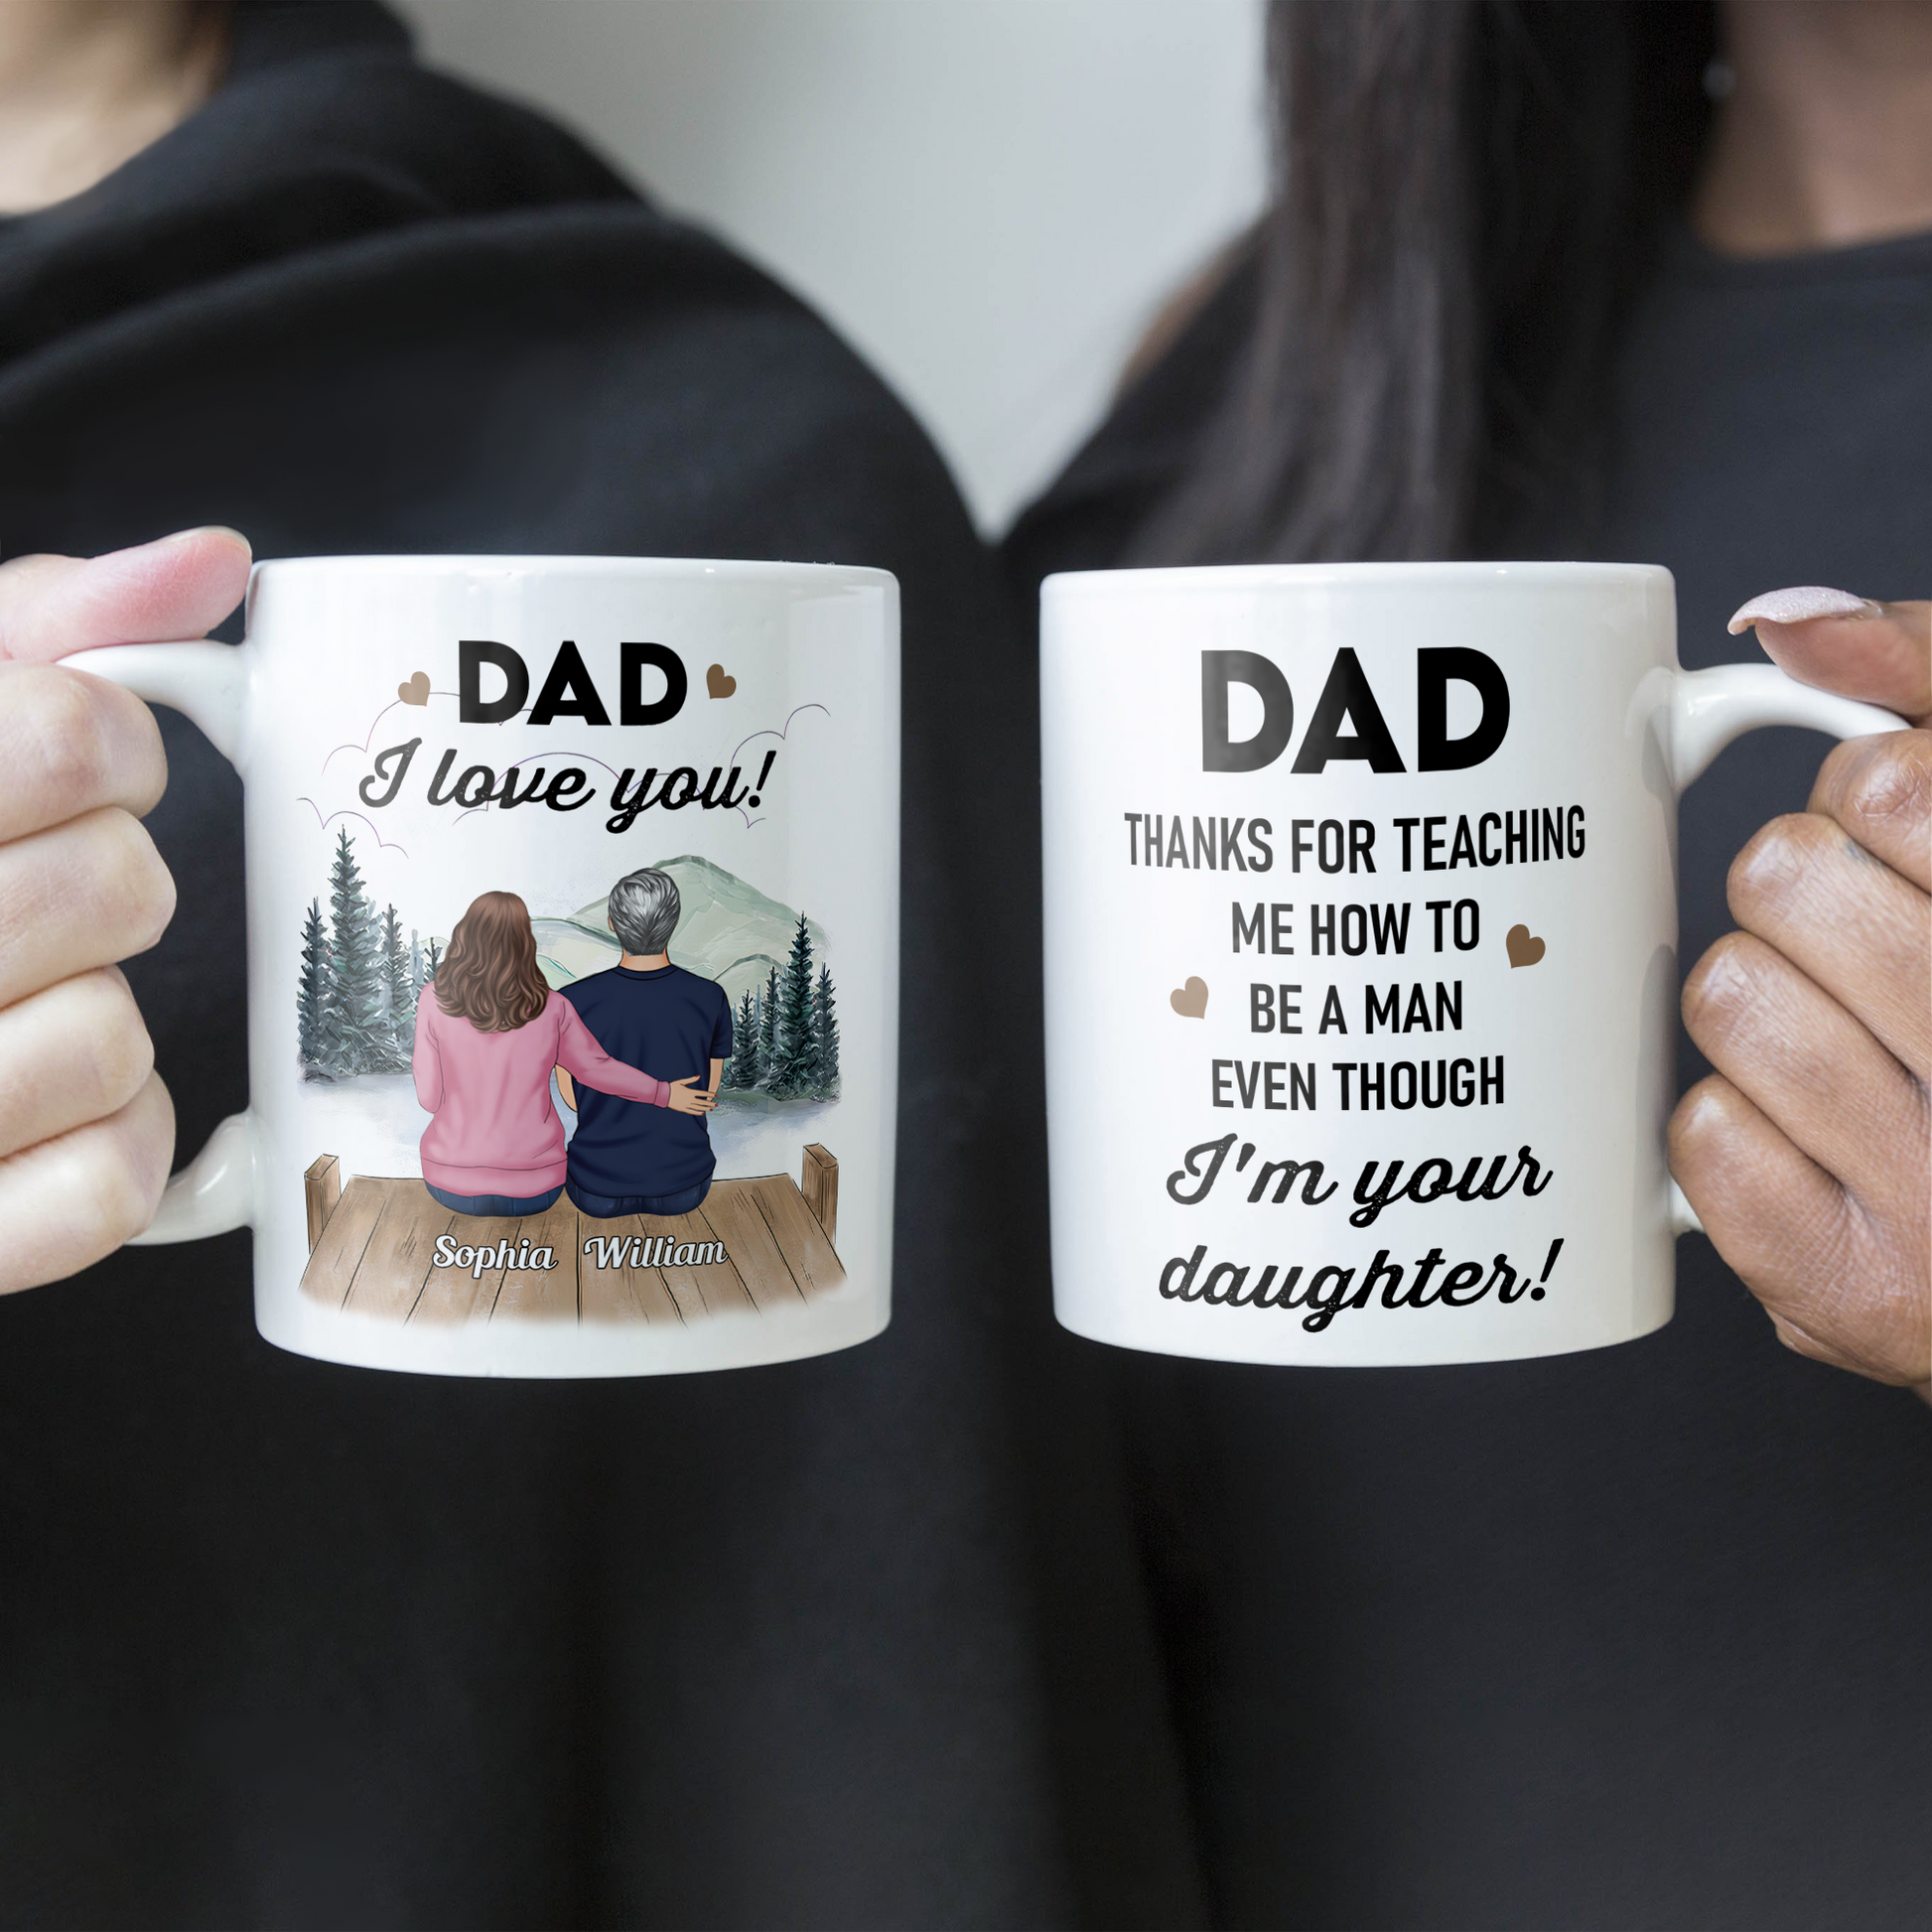 Personalized Dad and Grandpa Gifts Father's Day Gift M 628 Husband